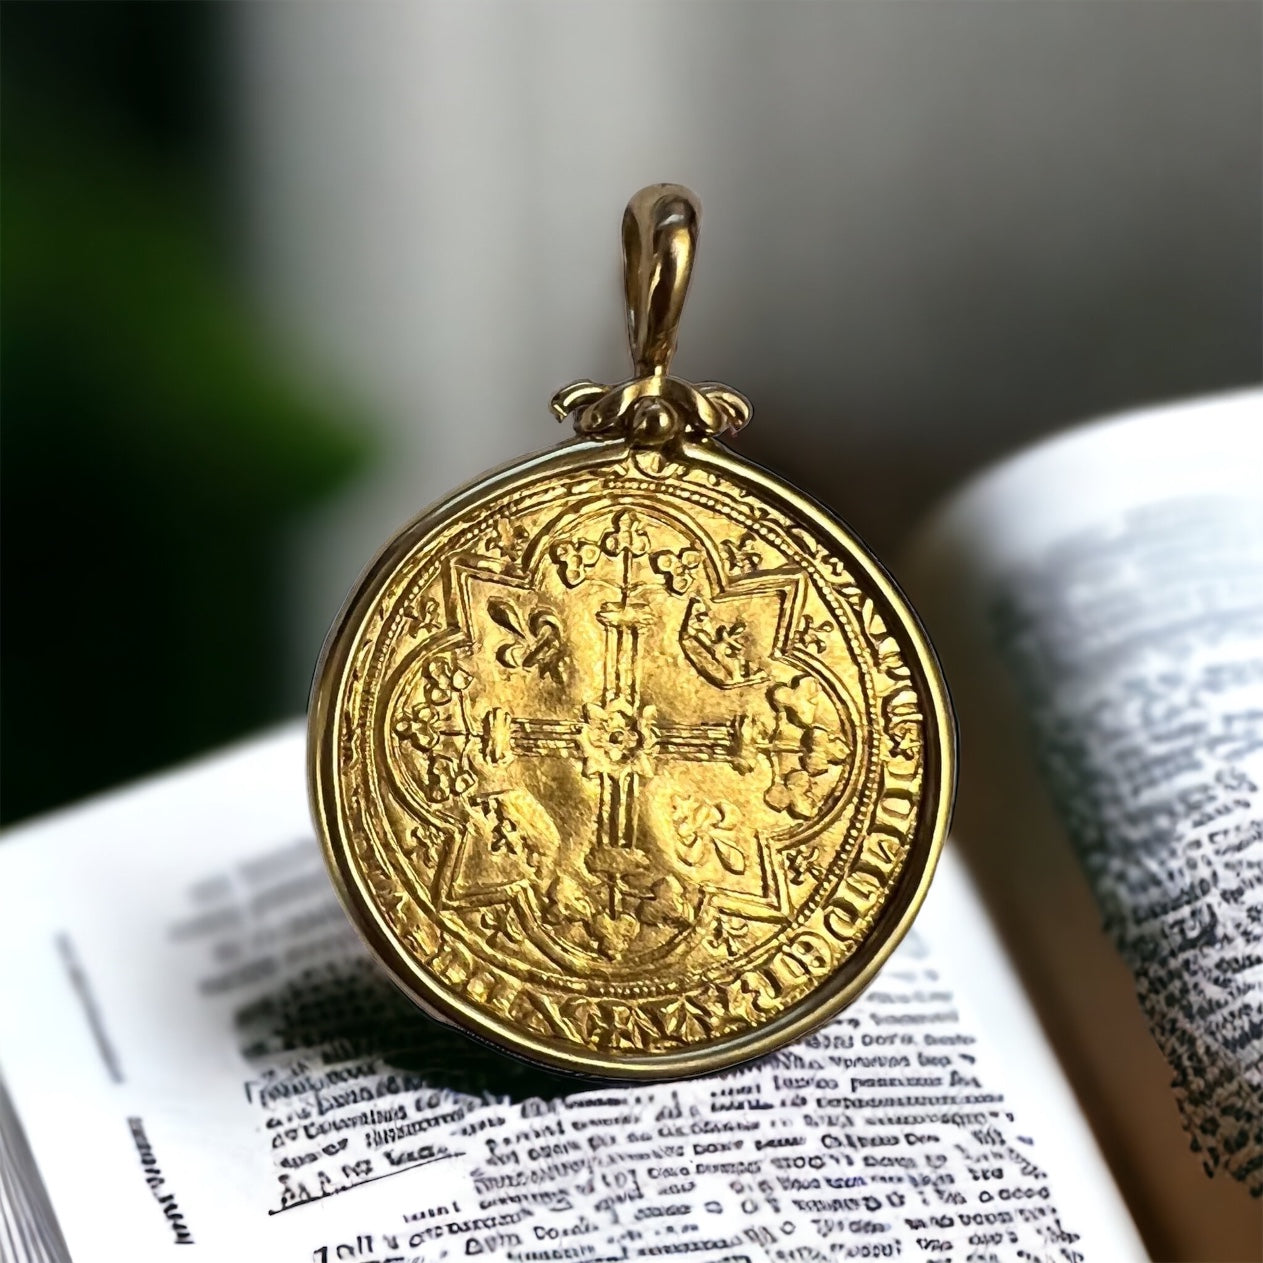 Ancient Middle Ages France - Gold Franc -  Circa 1364 - 1380 - Mounted in 18K gold